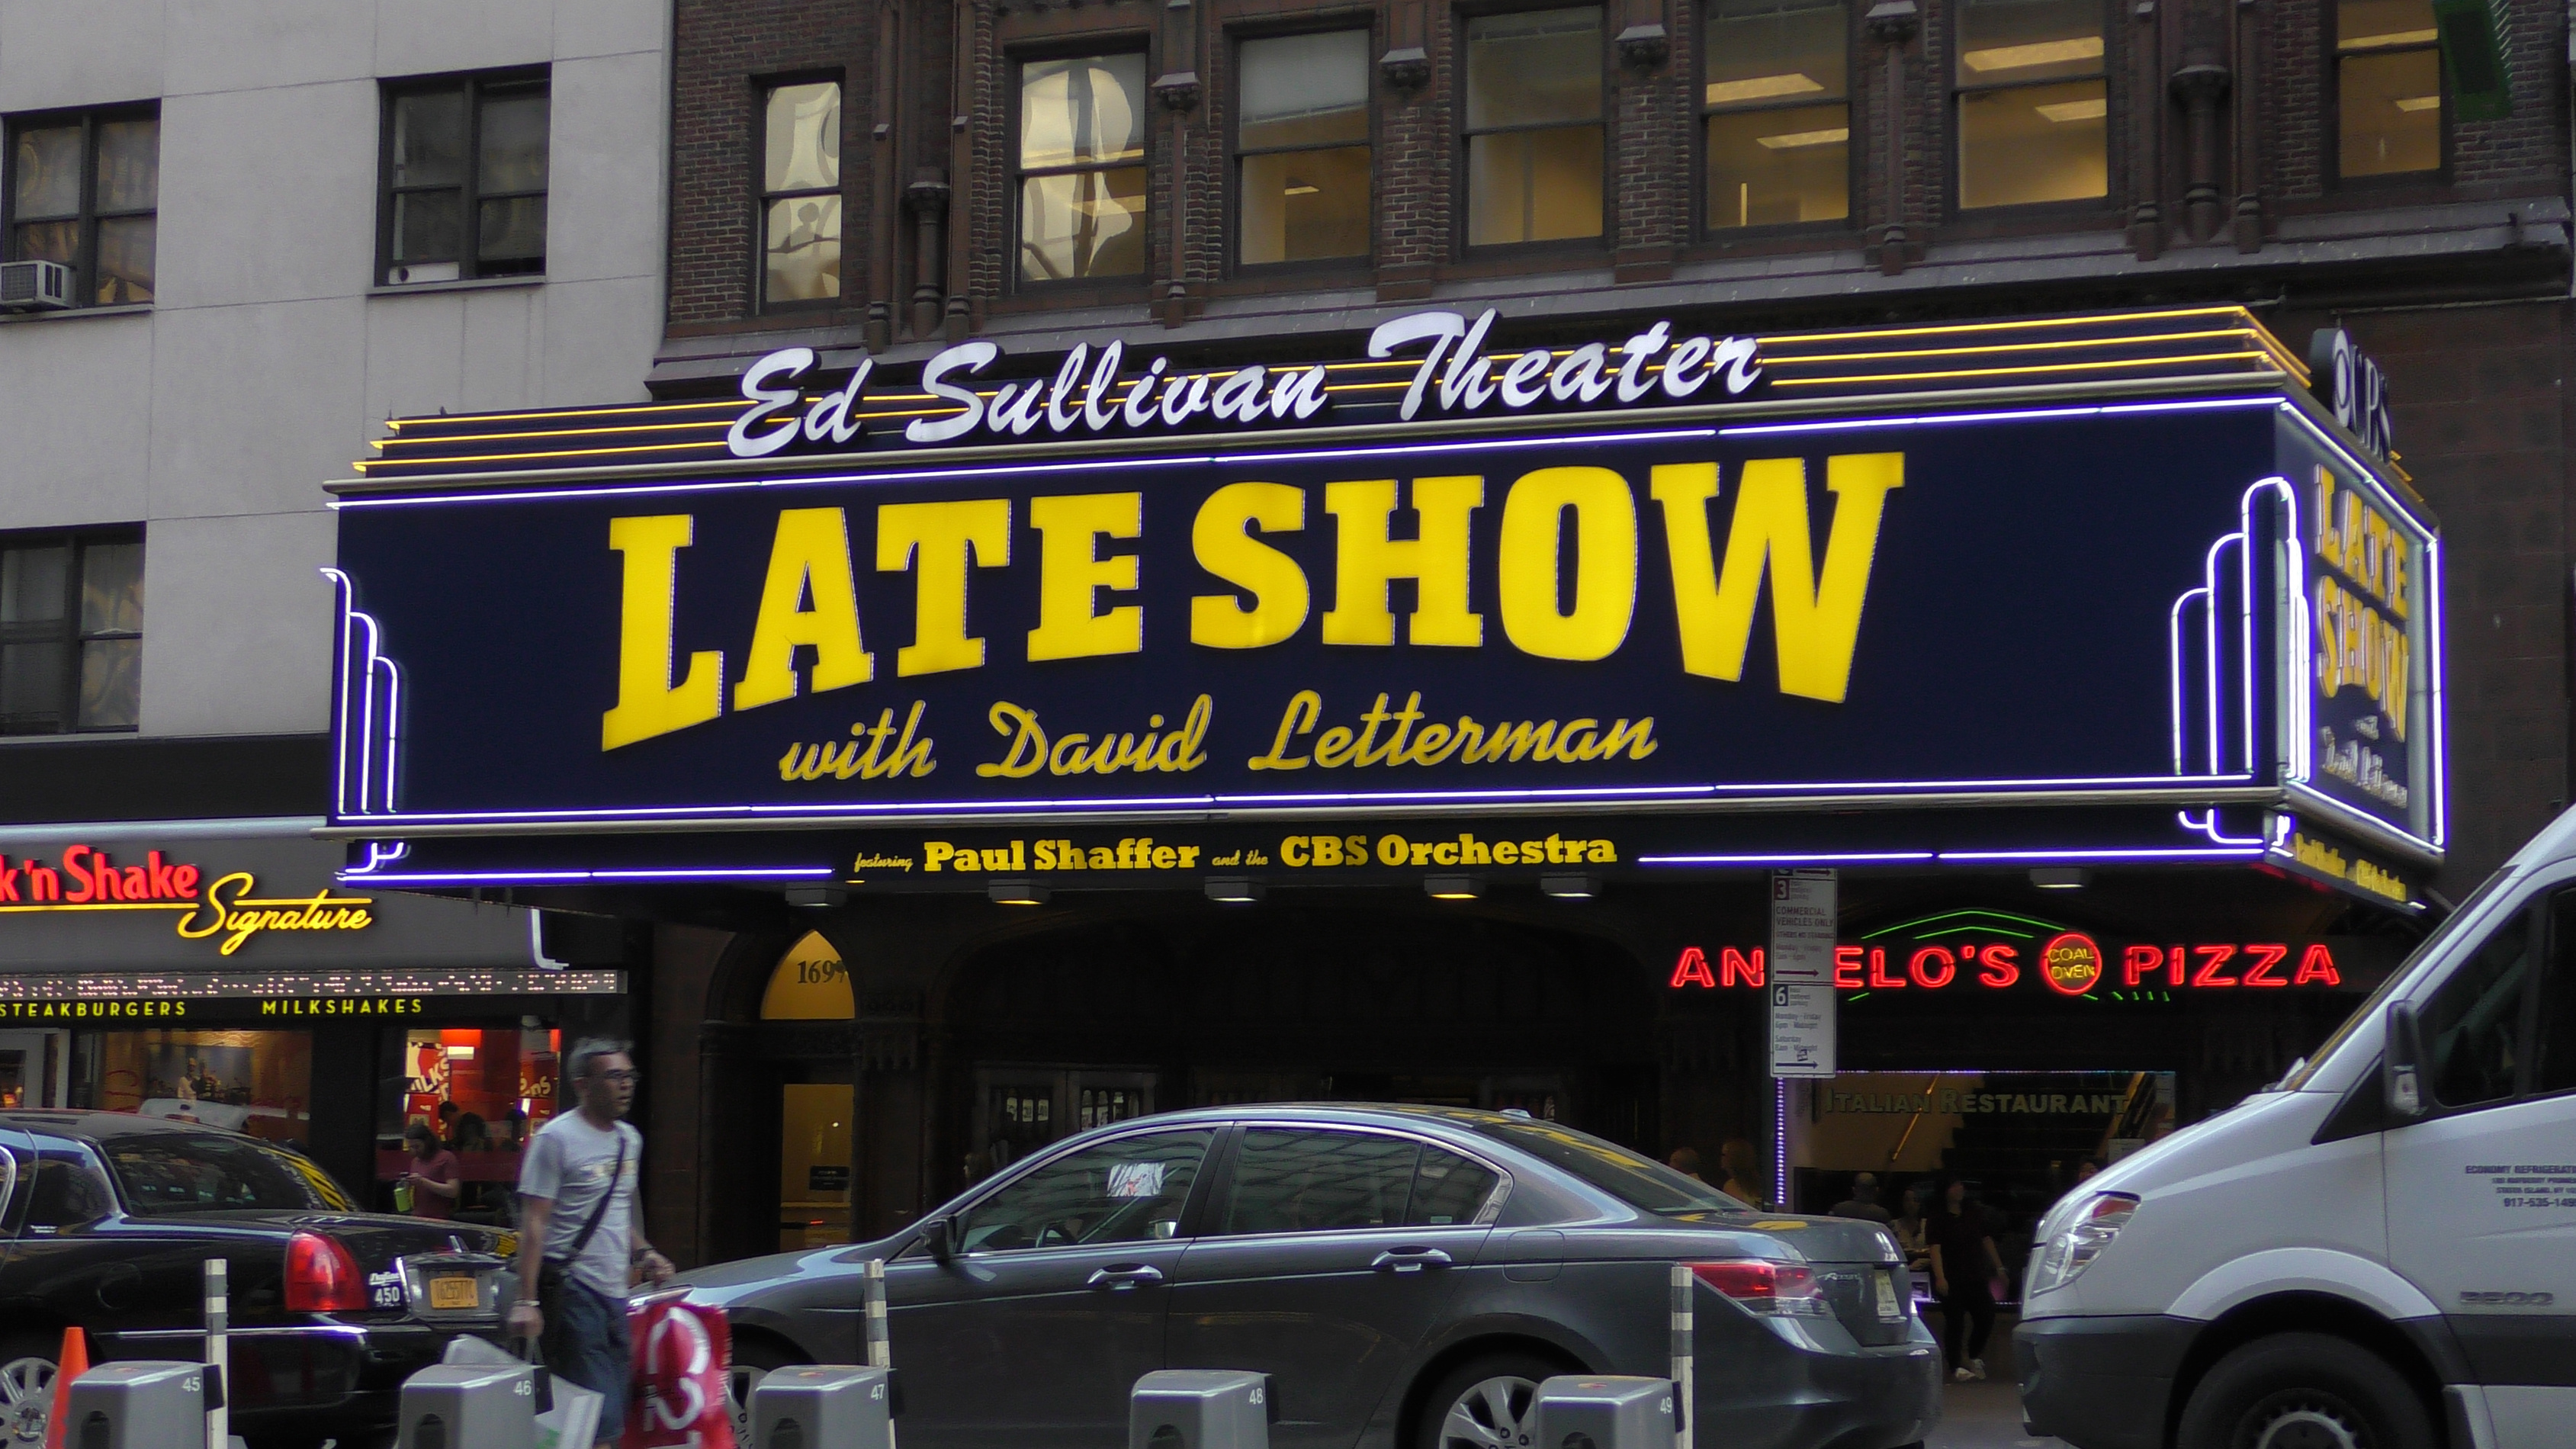 The Late Show Theater in New York City